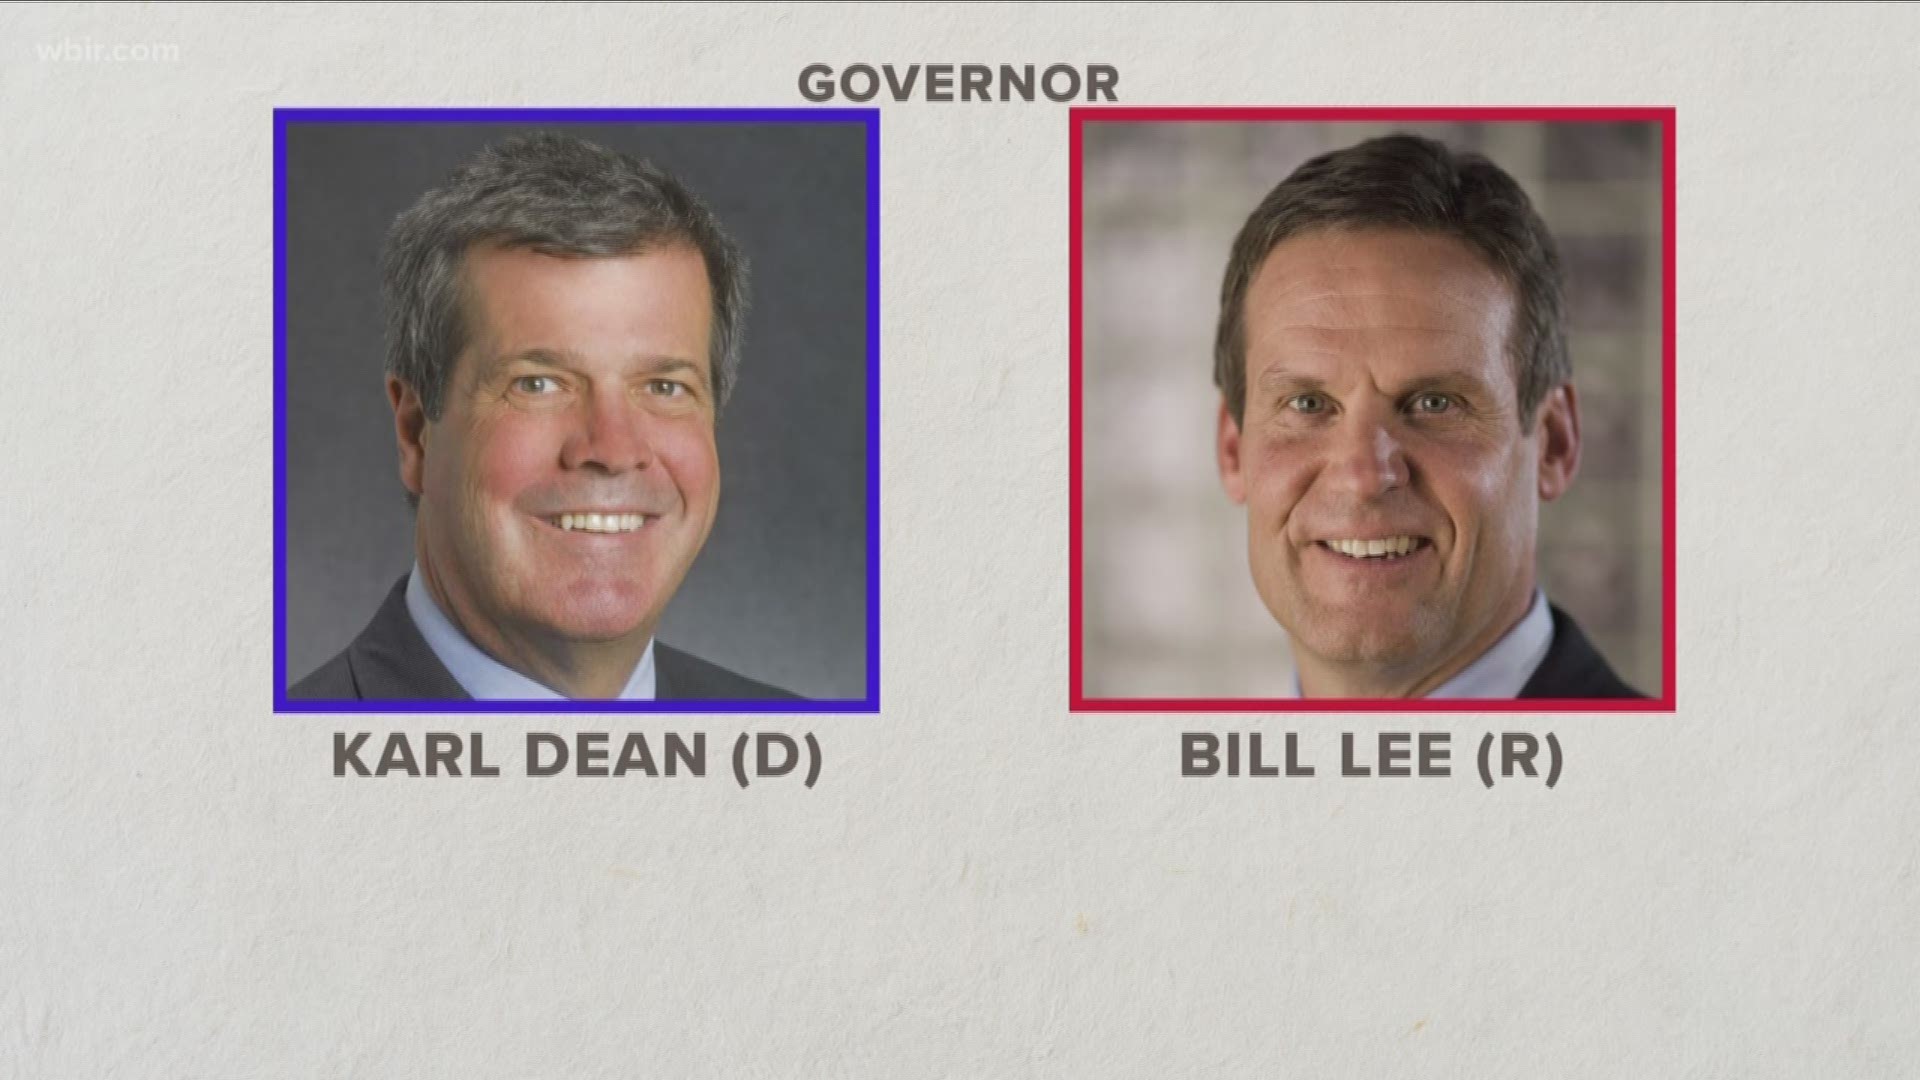 The winner will replace Bill Haslam as governor.